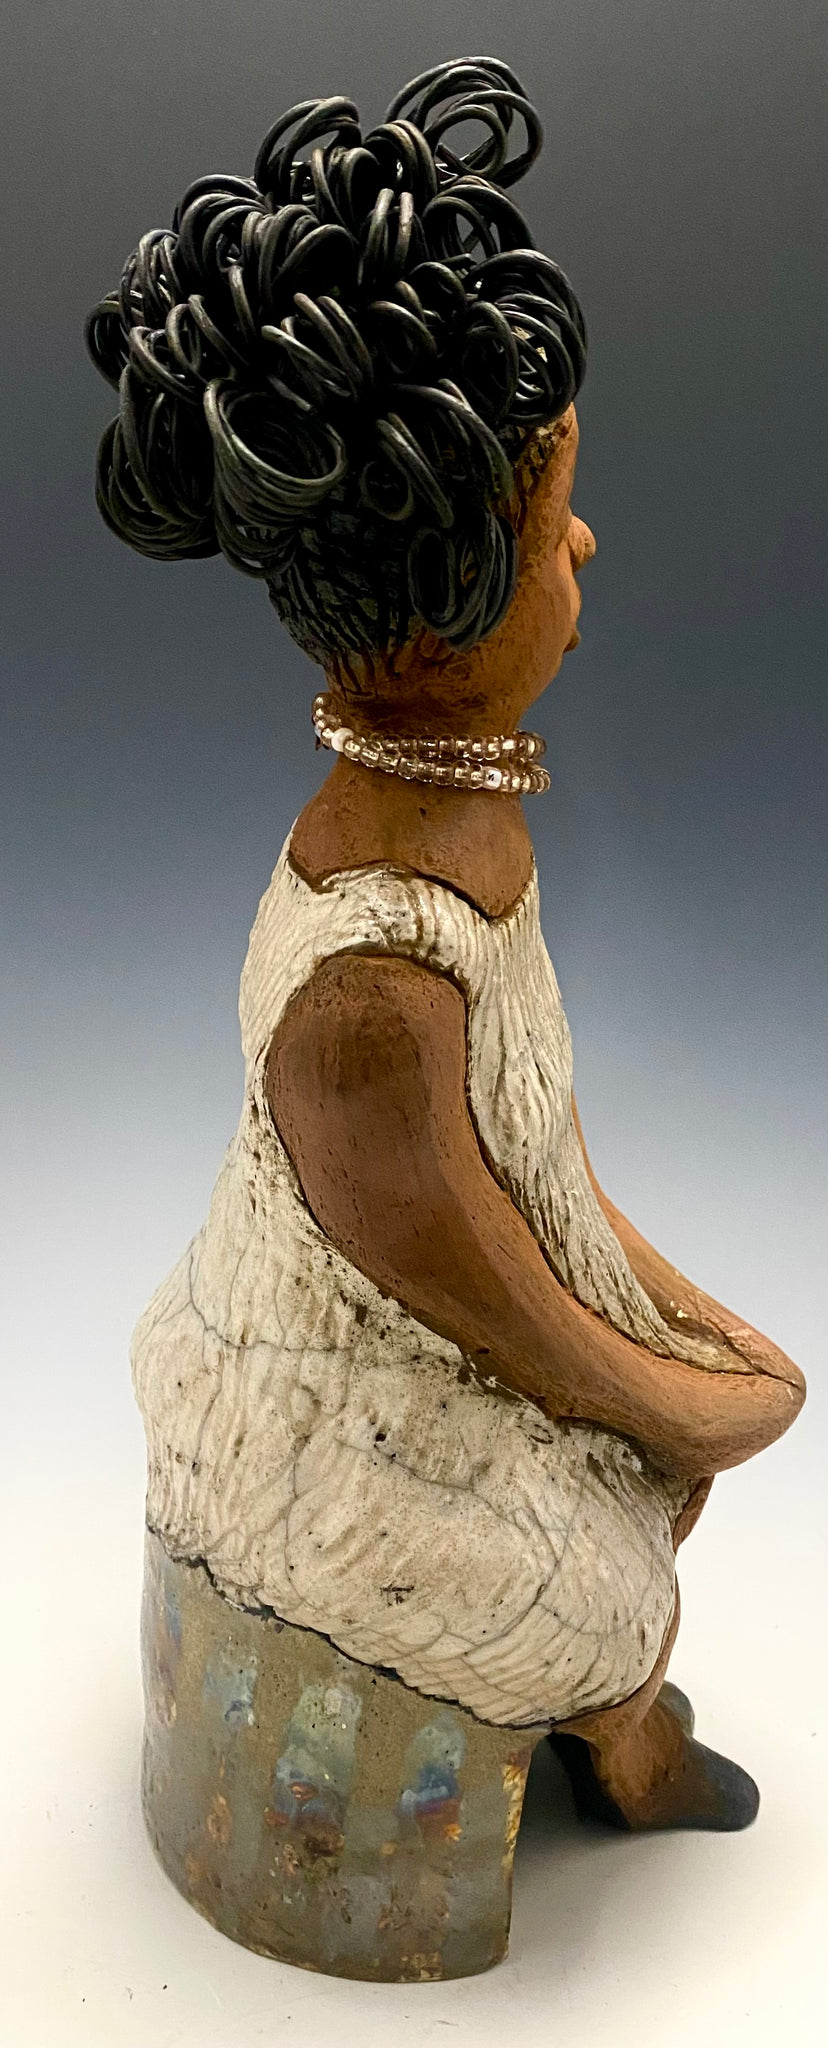 Meet Gwen!  You know someone like Gwen. One who reaps elegance and sophistication!   Gwen stands 13 " x 6" x 6" and weighs 3.07 lbs.   She has a lovely brown complexion with over 5 feet of 16 gauge spiral coiled wire hair.  Gwen's metallic off white dress is accented by a multicolored white and amber beaded necklace. Gwen’s straight face gives her a distinguished no nonsense look. Gwen sits with her hands rested as she awaits a special place to grace your home.